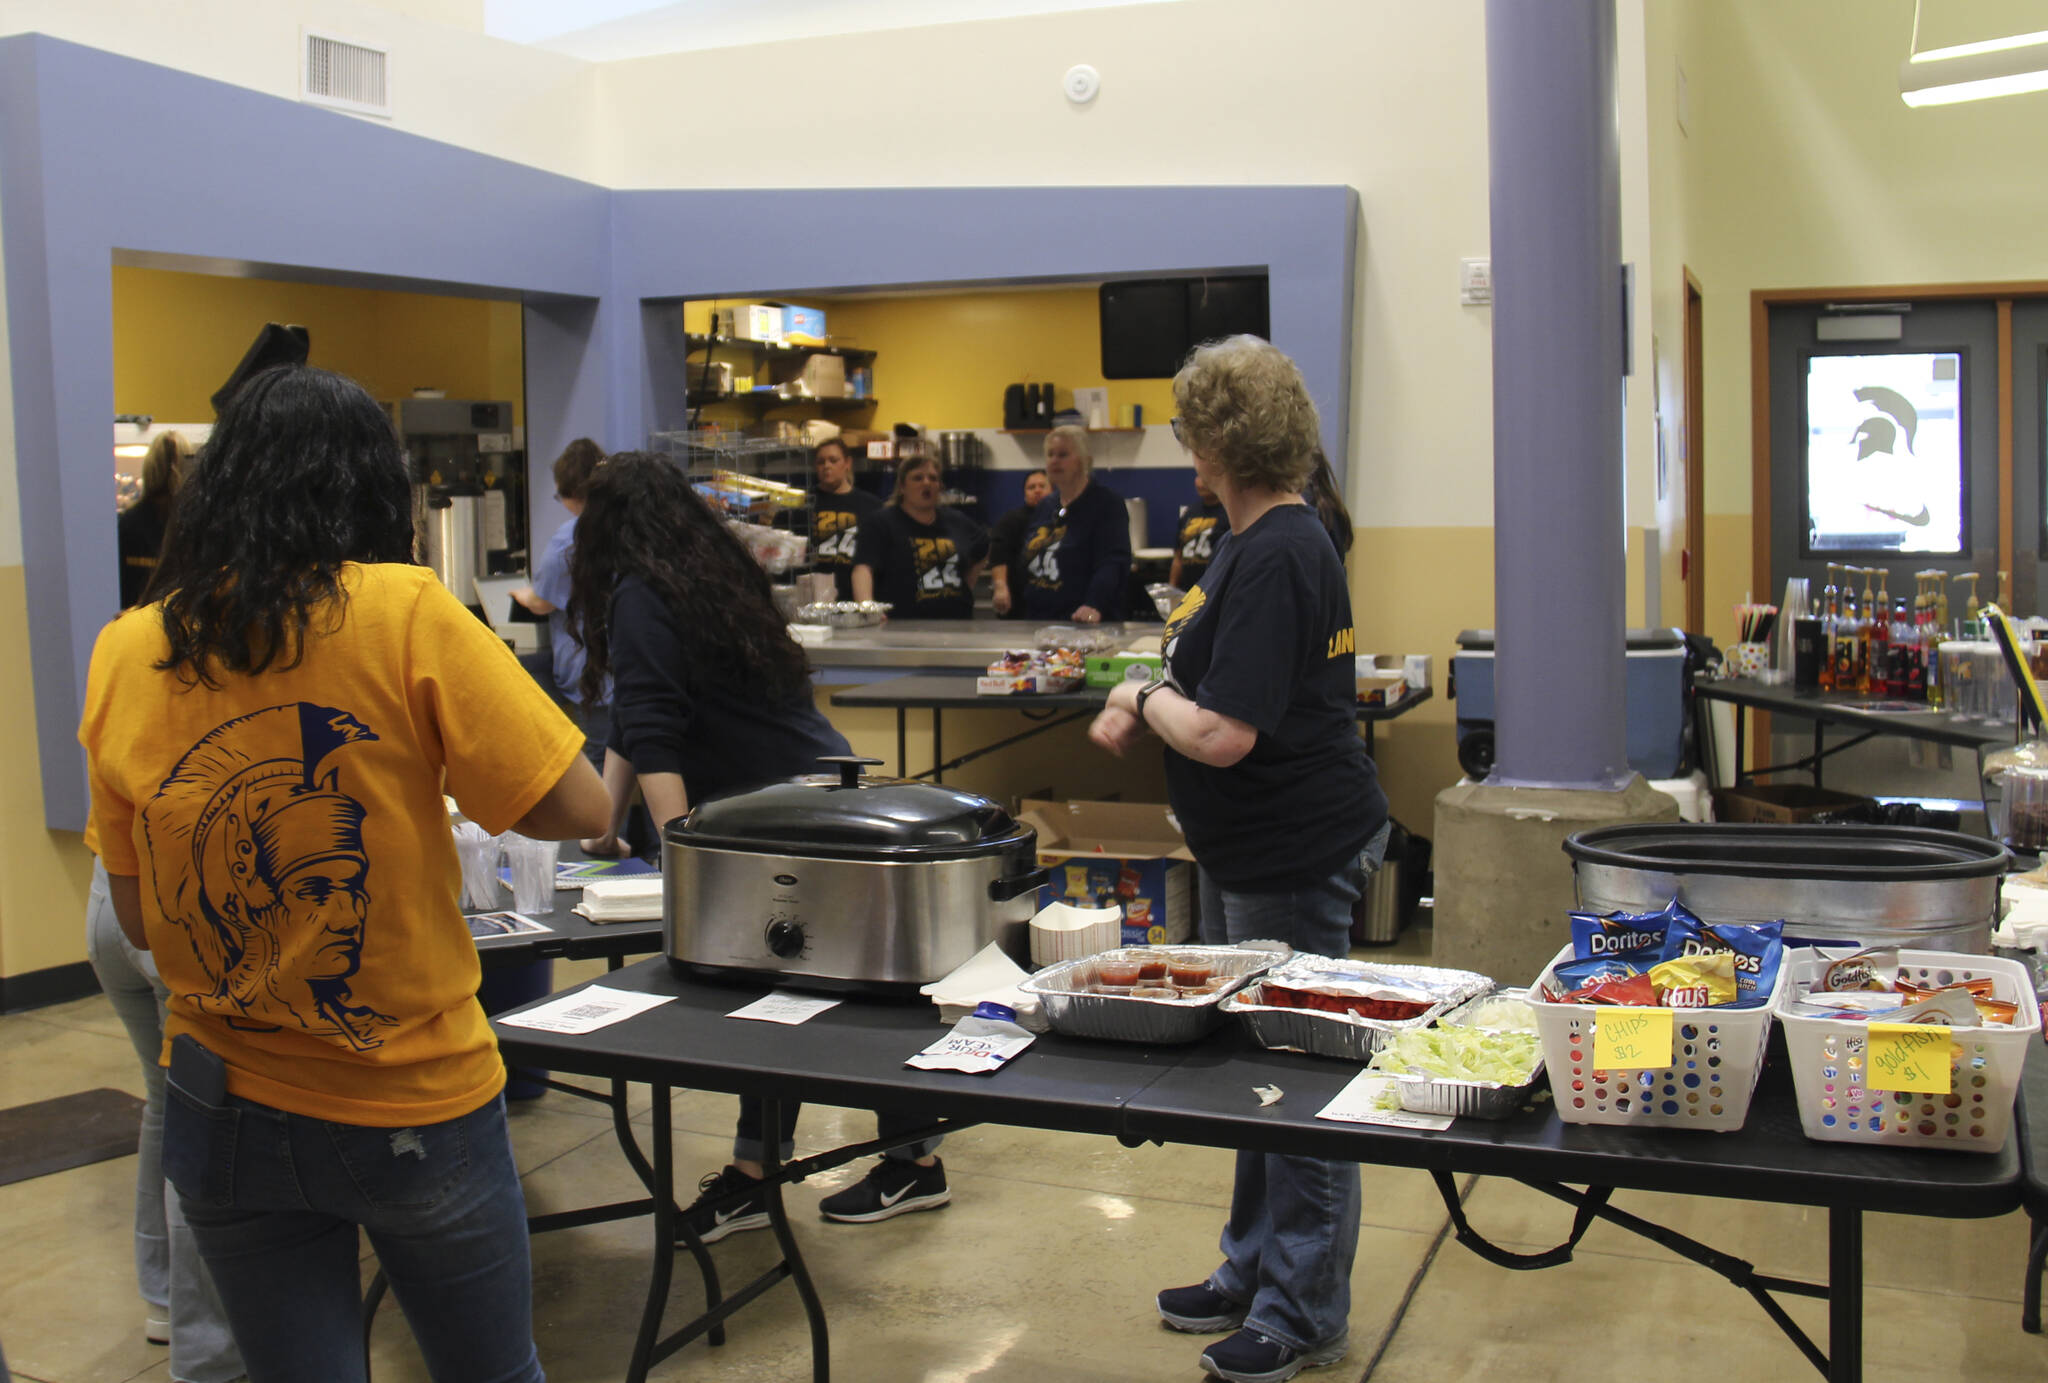 Senior parents offered up some amazing food, which helped hungry bidders keep up their strength for this marathon two-day event! Money raised will go to help fund Senior Safe Night activities after graduation.